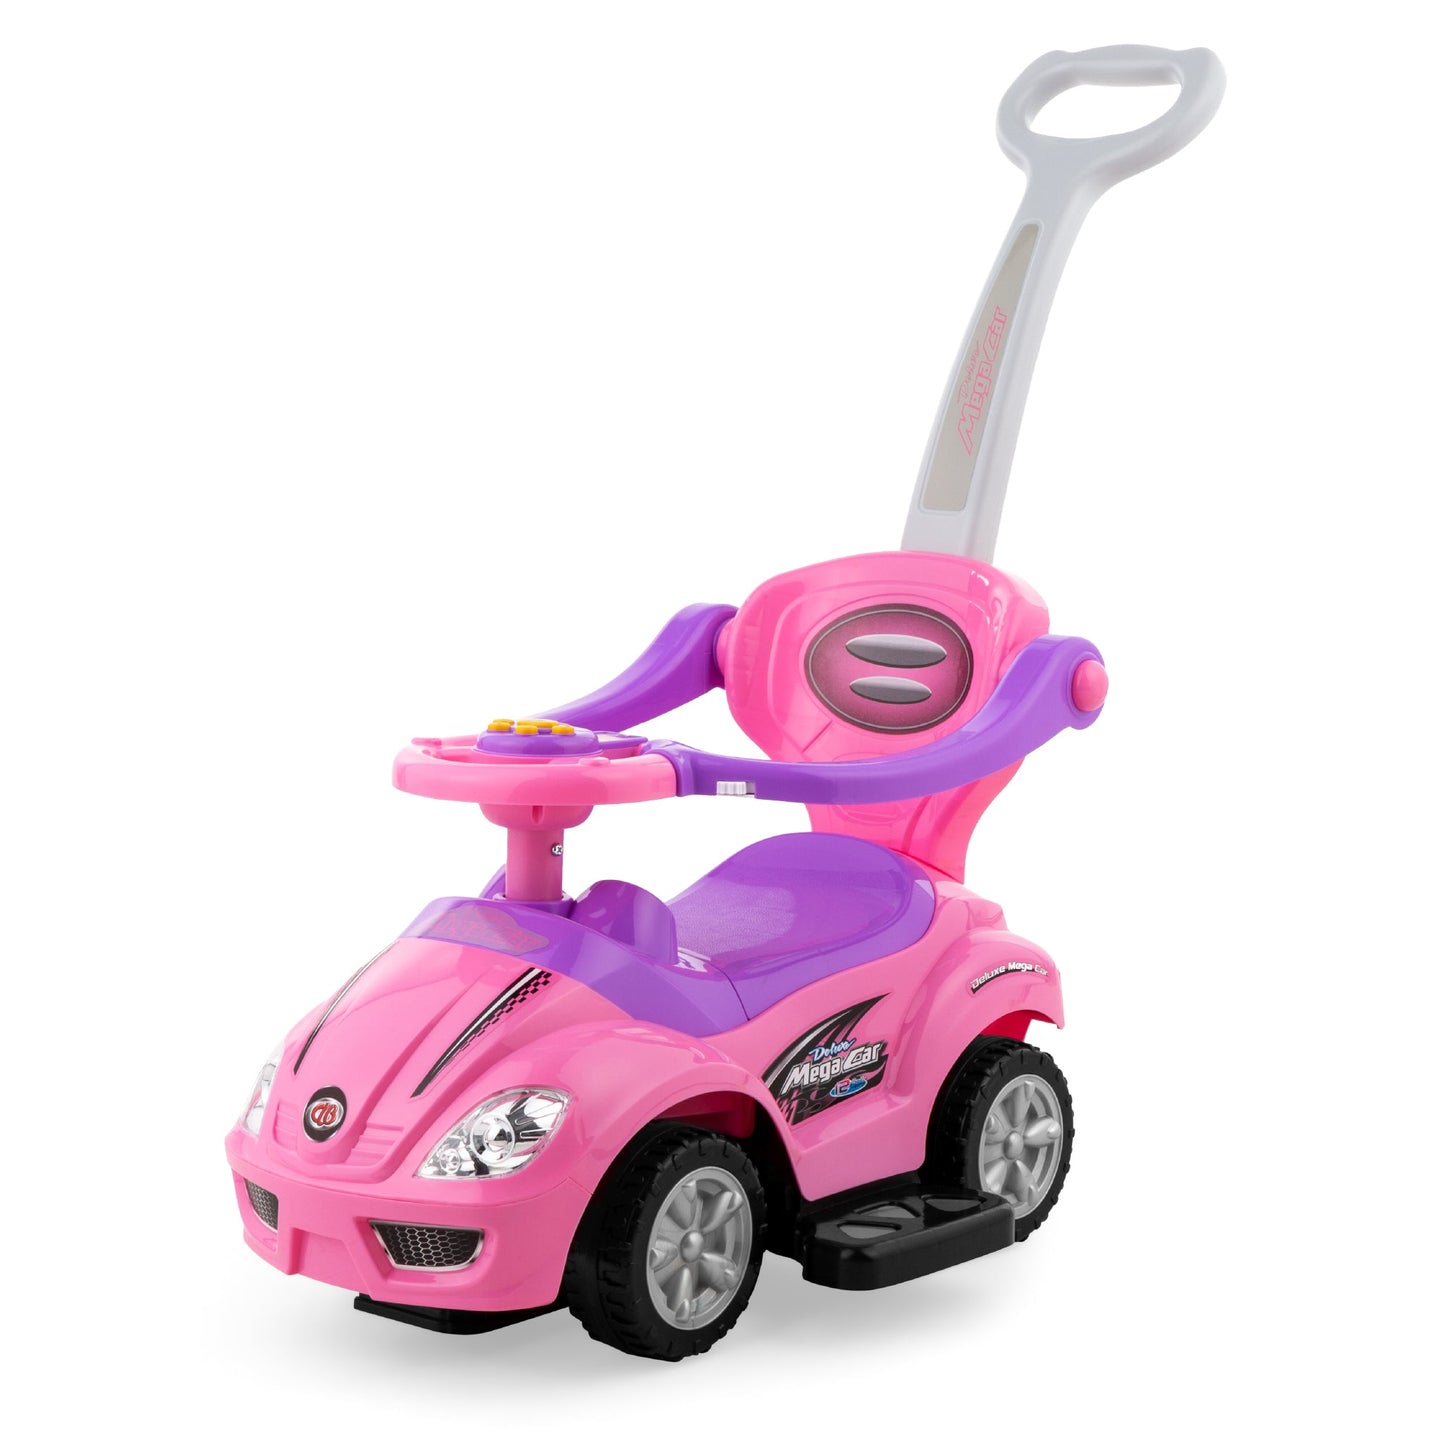 3-in-1 Kids Push Car w/ Handle and Horn